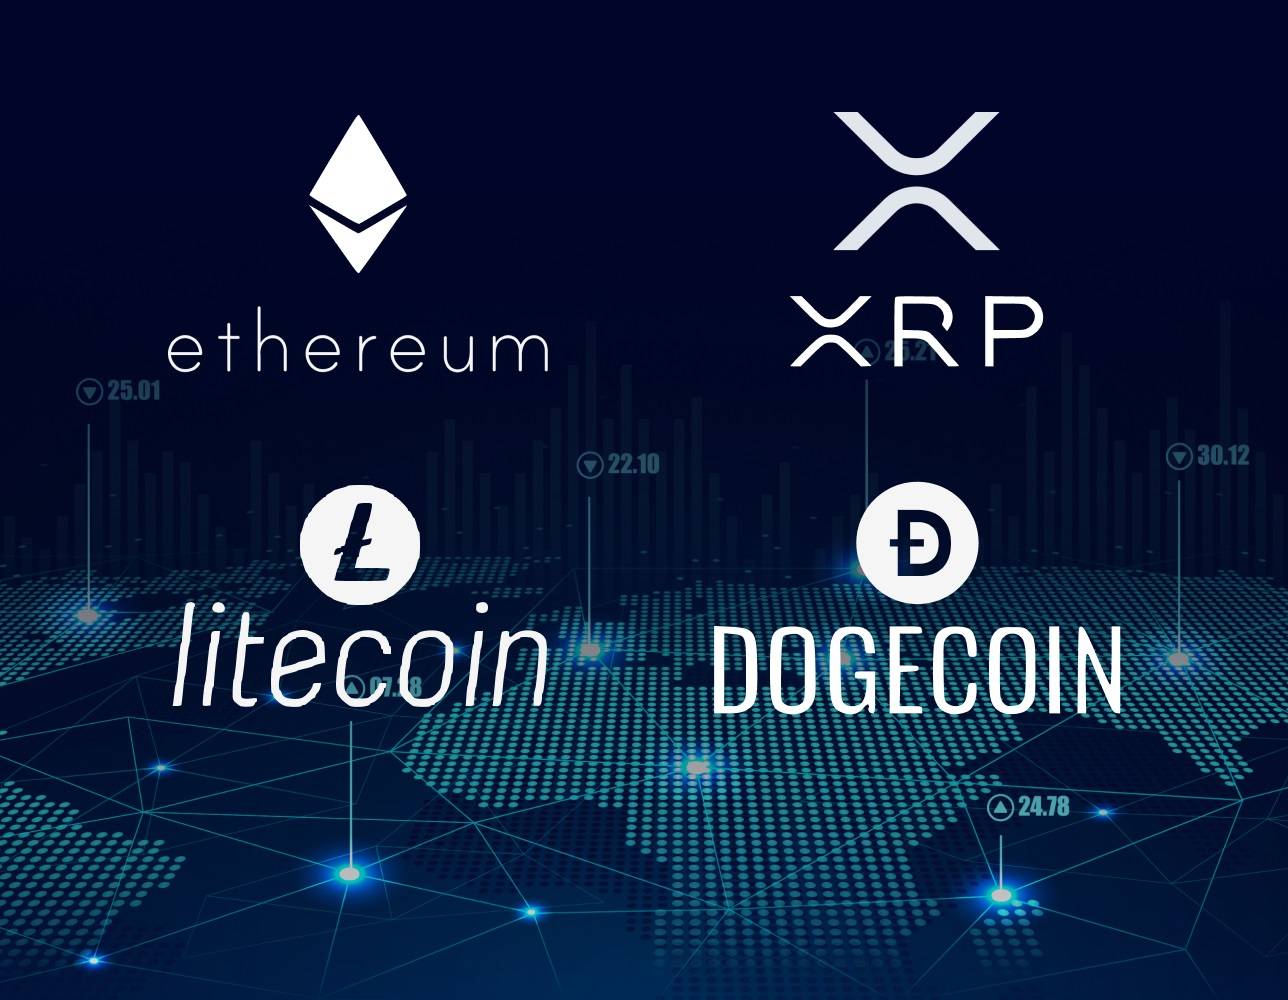 Alternatives to Bitcoin, invest in altcoins such as ETH, XRP, LTC, DOGE